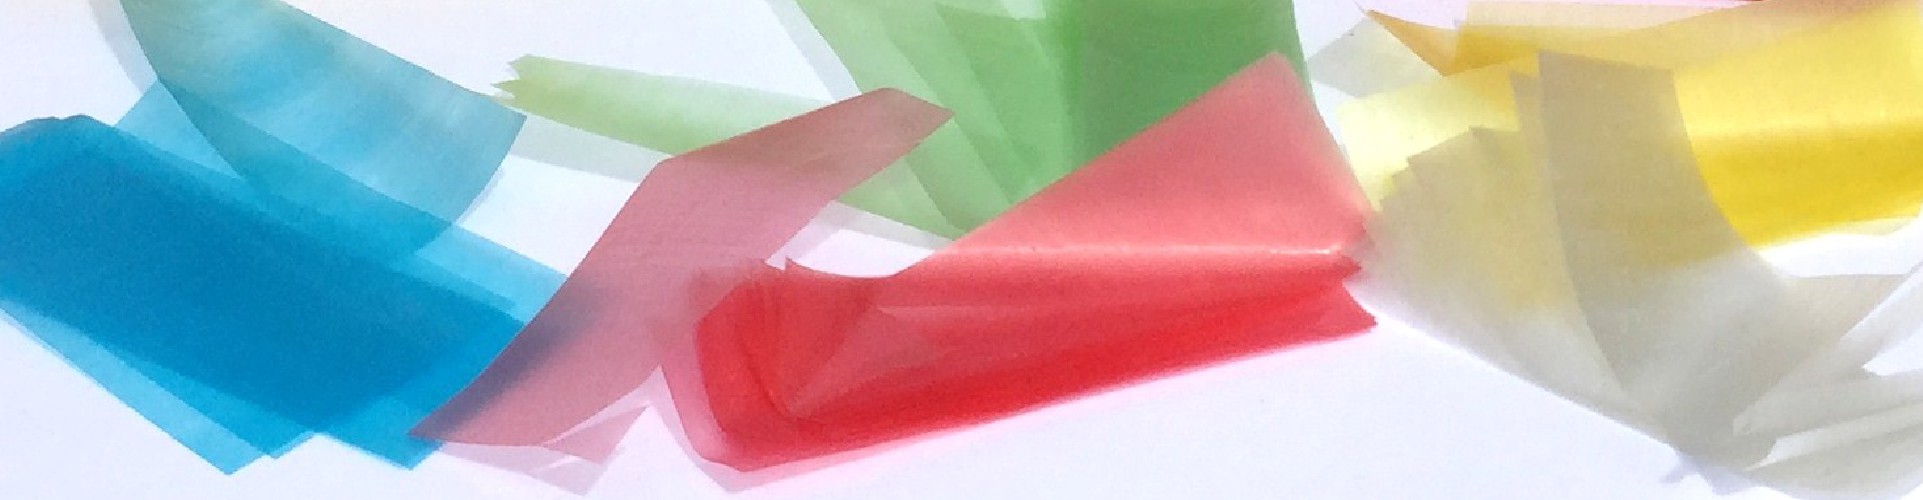 close-up of water soluble confetti